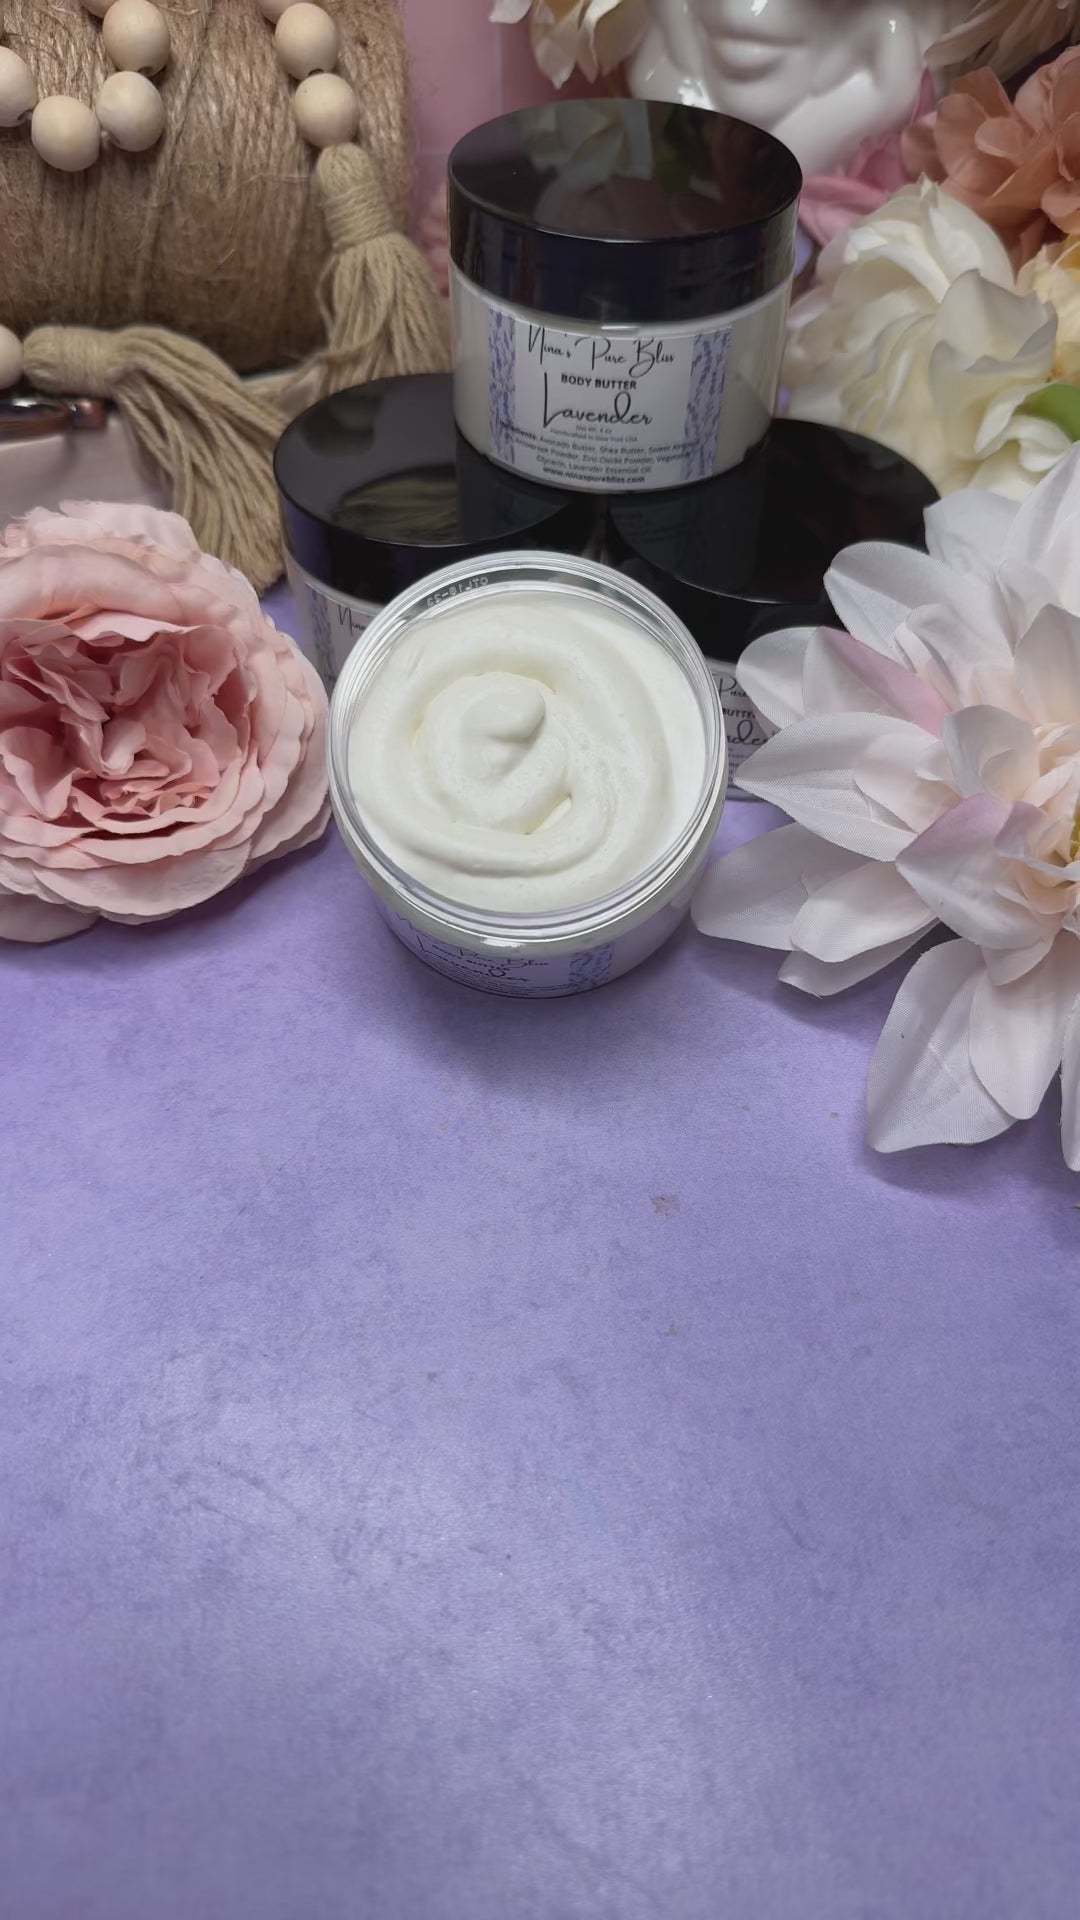 Lavender Shea Butter All-Natural Moisturizing Body Butter for Eczema Dry Skin, Herbal Infused